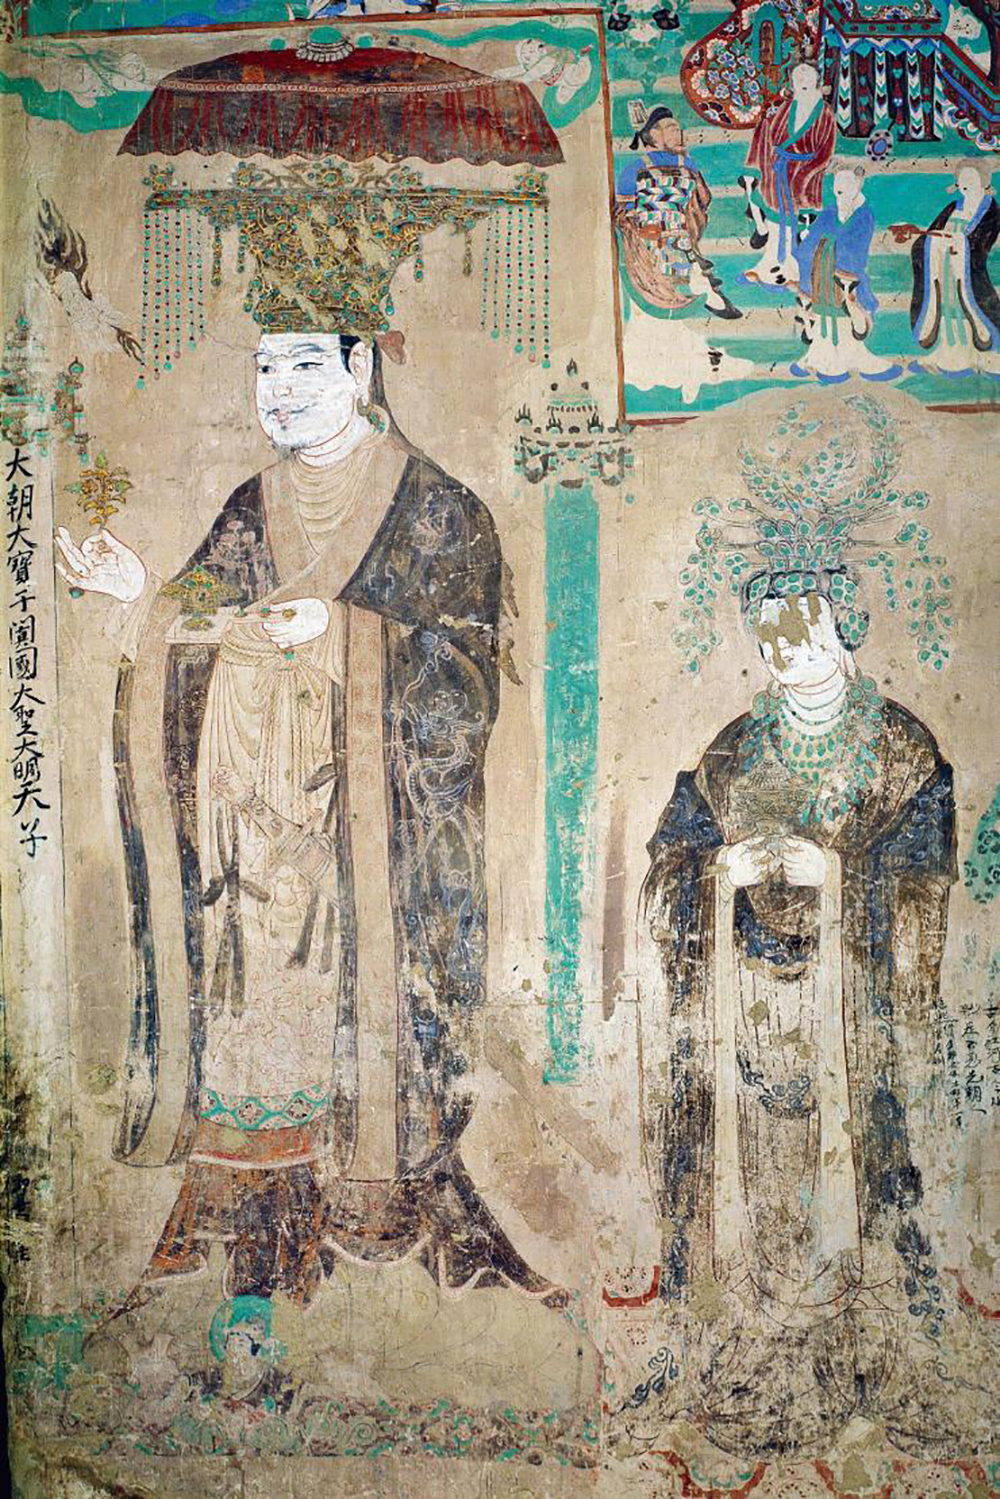 Li Shengtian and the daughter of Cao Yijin, from Cave 98.